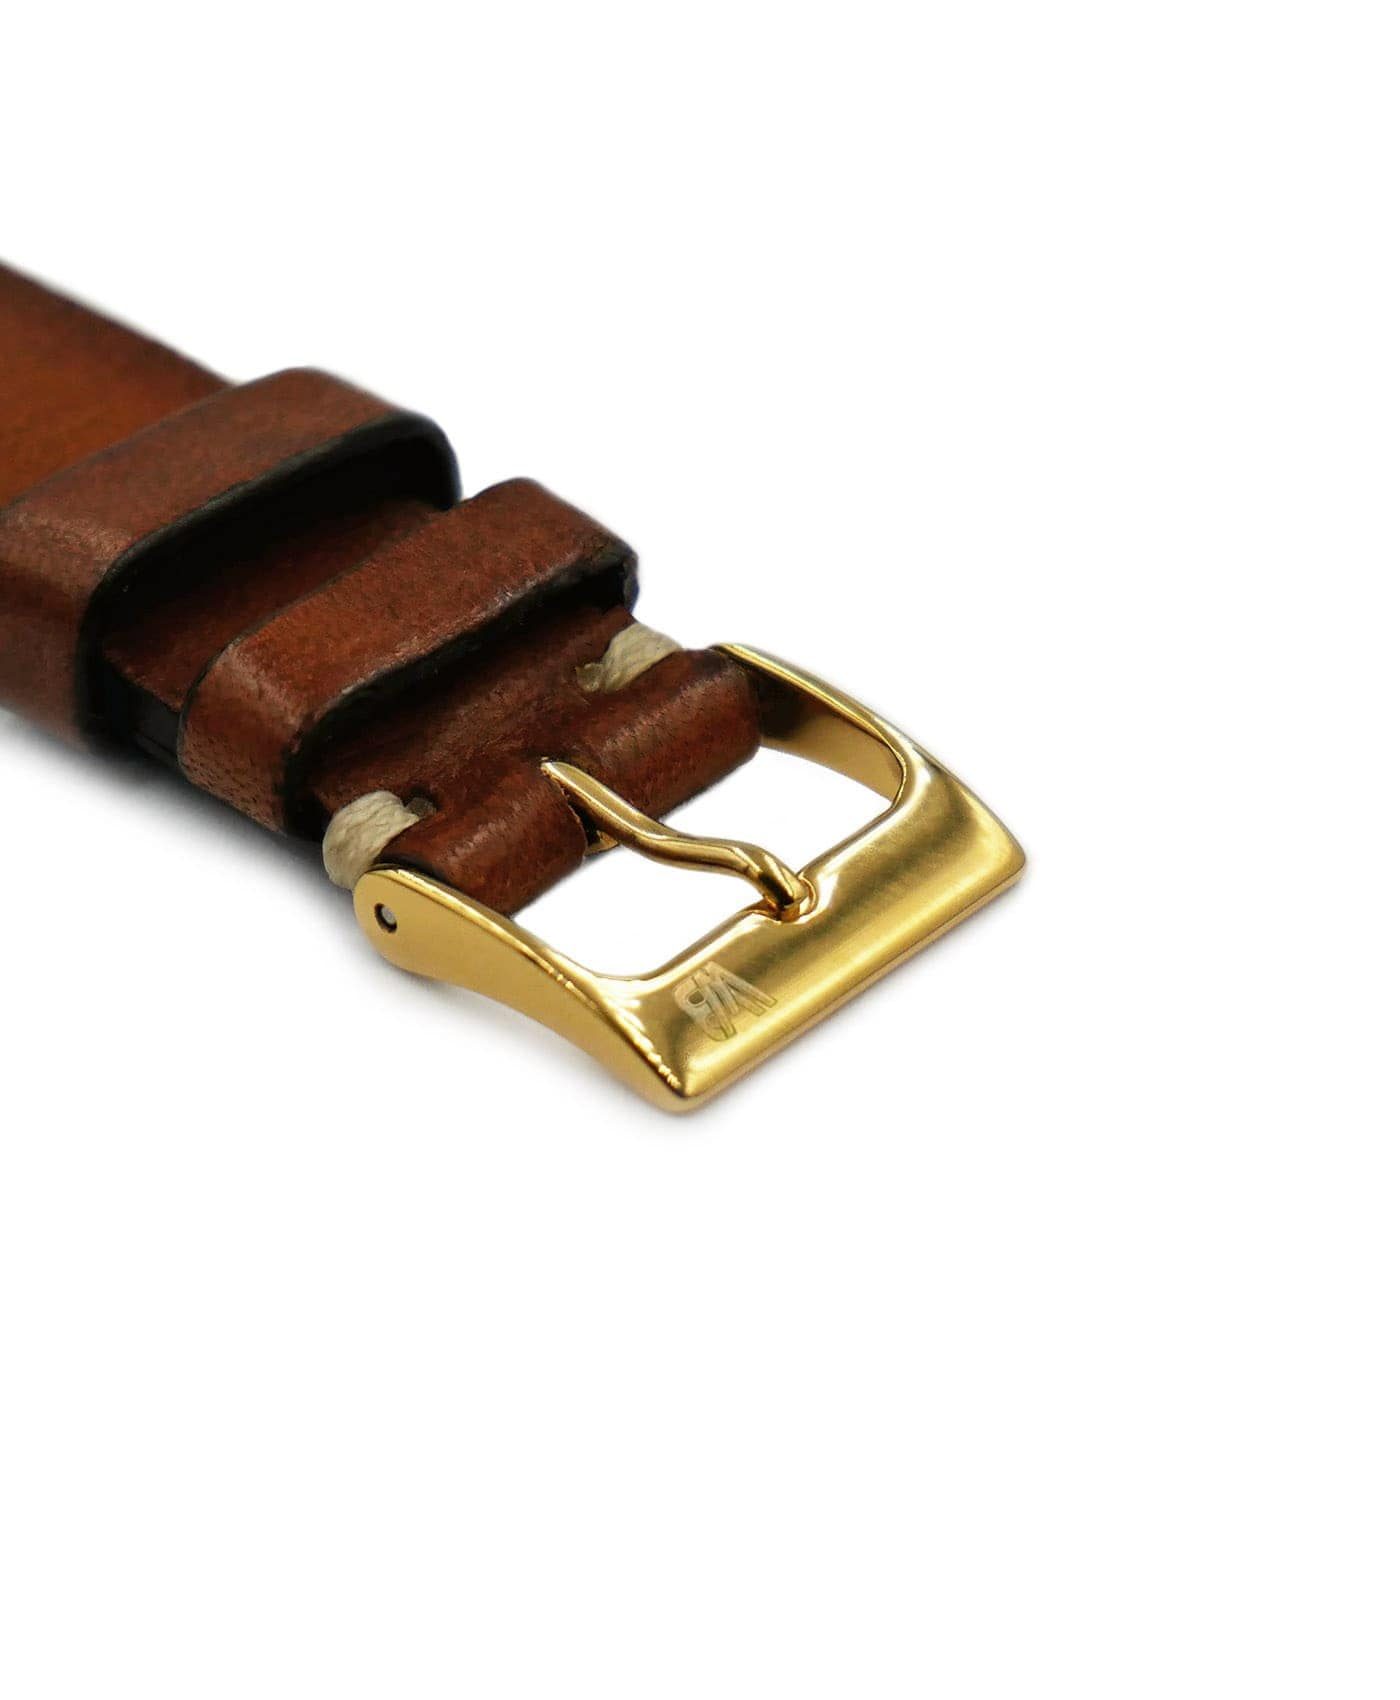 Gold Buckle on brown watch leather strap Watchbandit